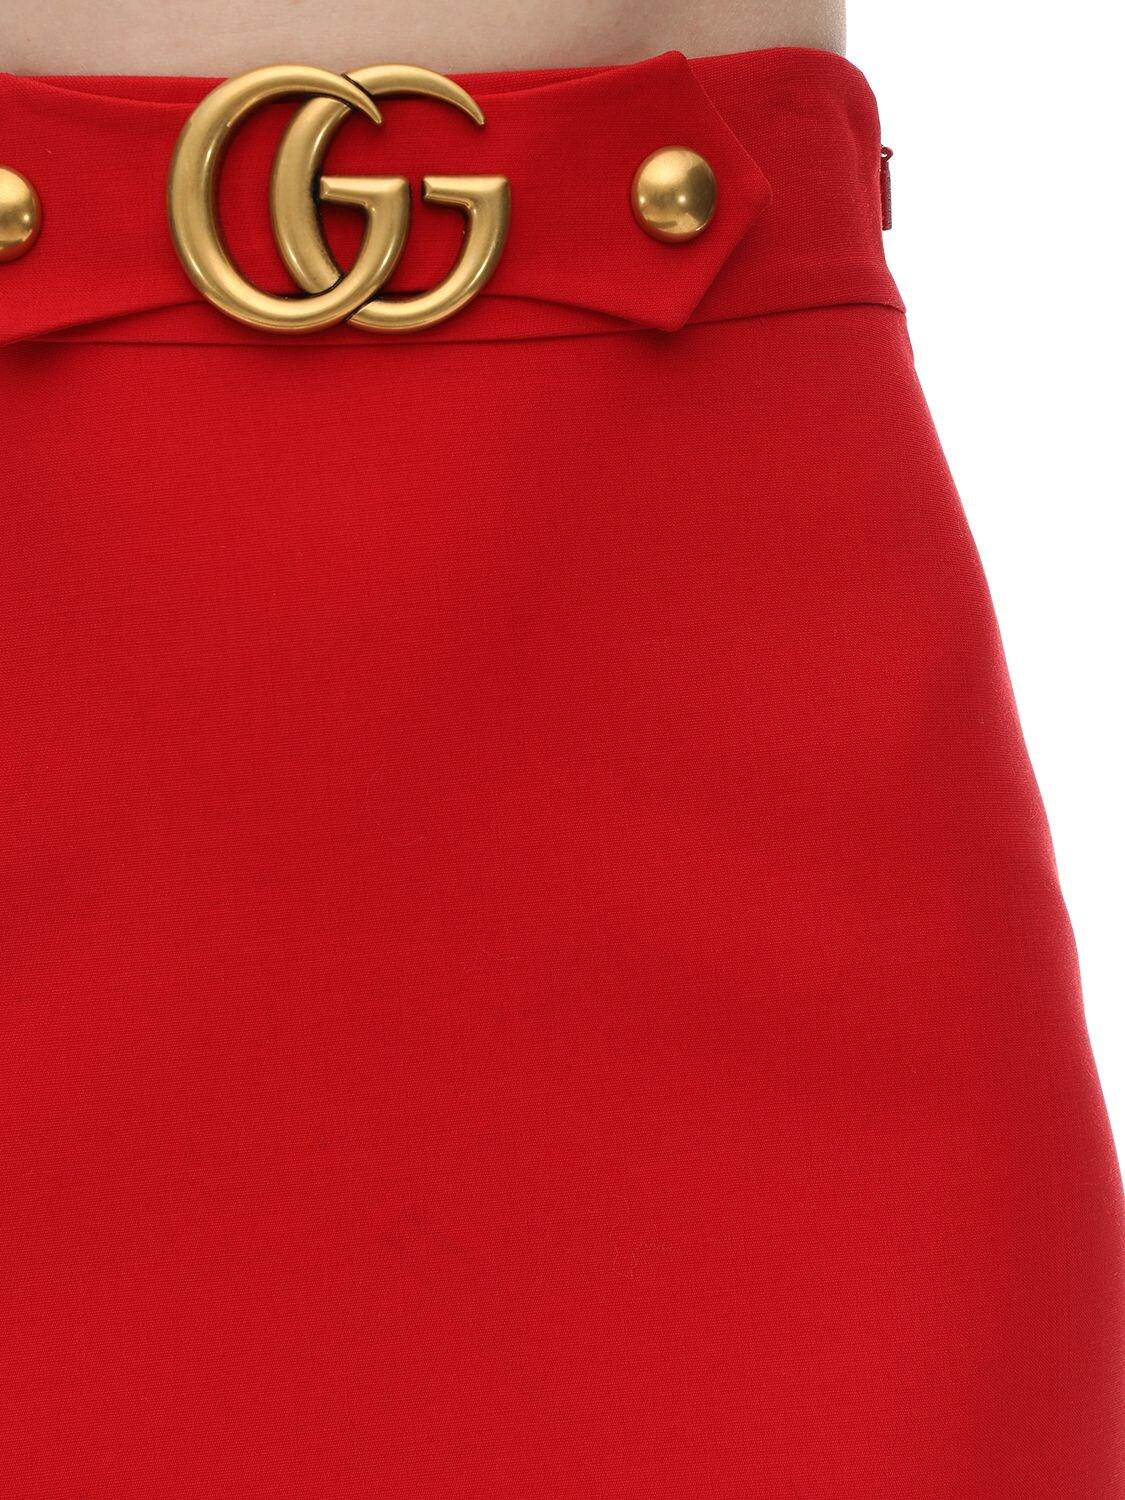 Gucci Gg Buckle Wool & Silk Crepe Skirt in Red - Lyst